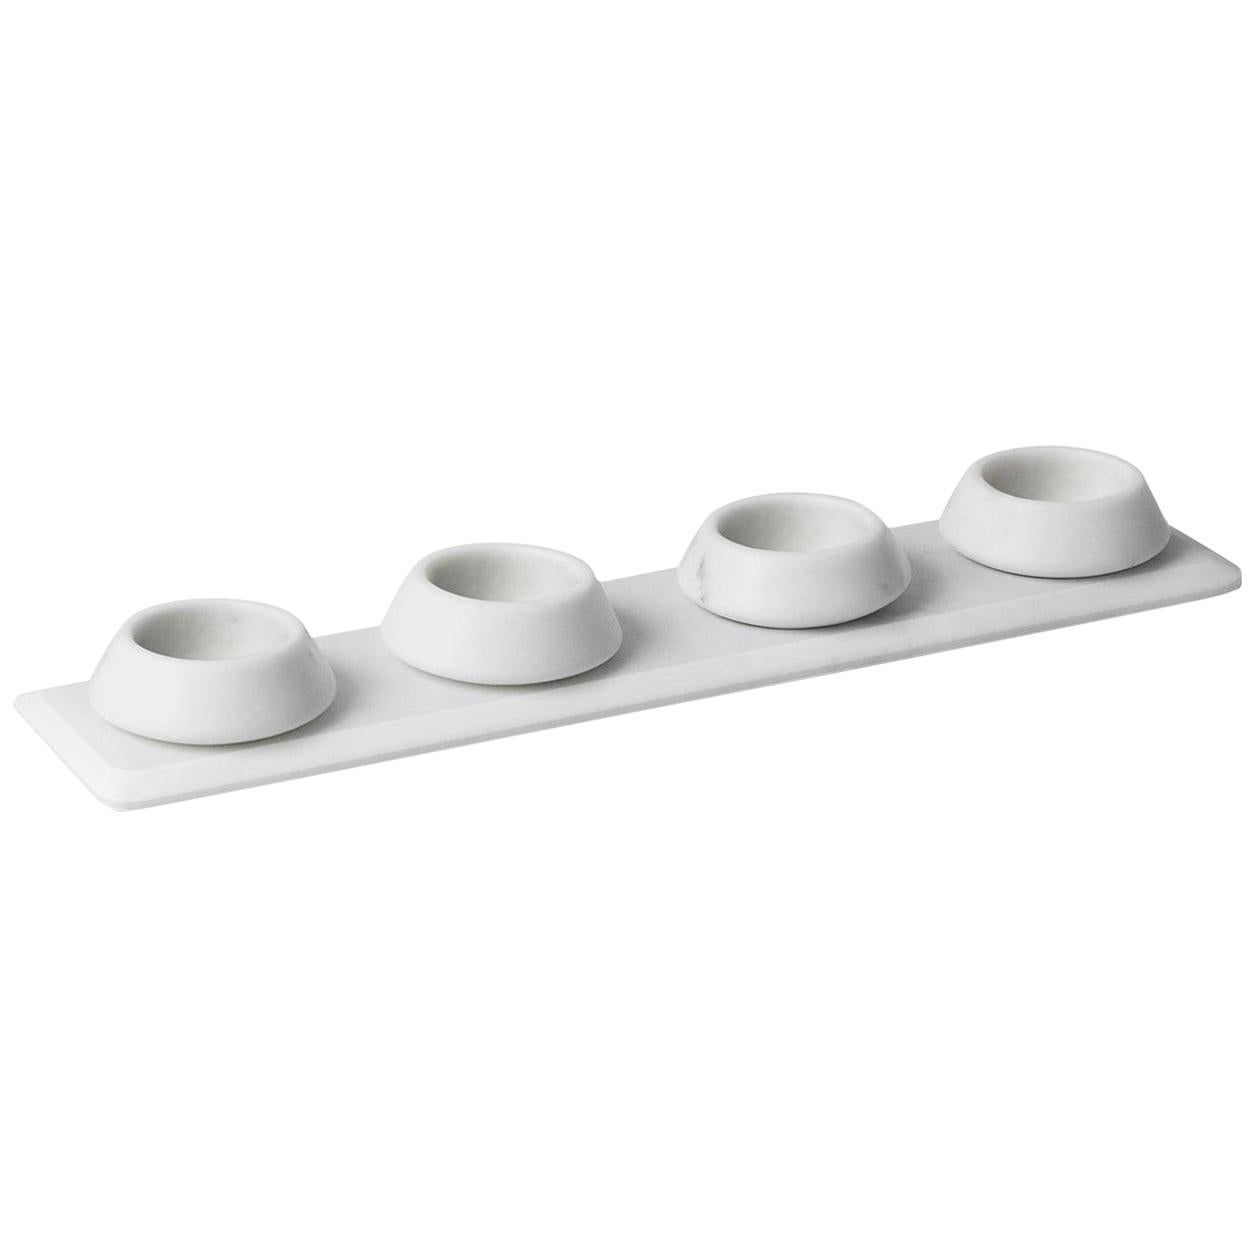 New modern Condiments Tray in White Michelangelo Marble Creator Ivan Colominas